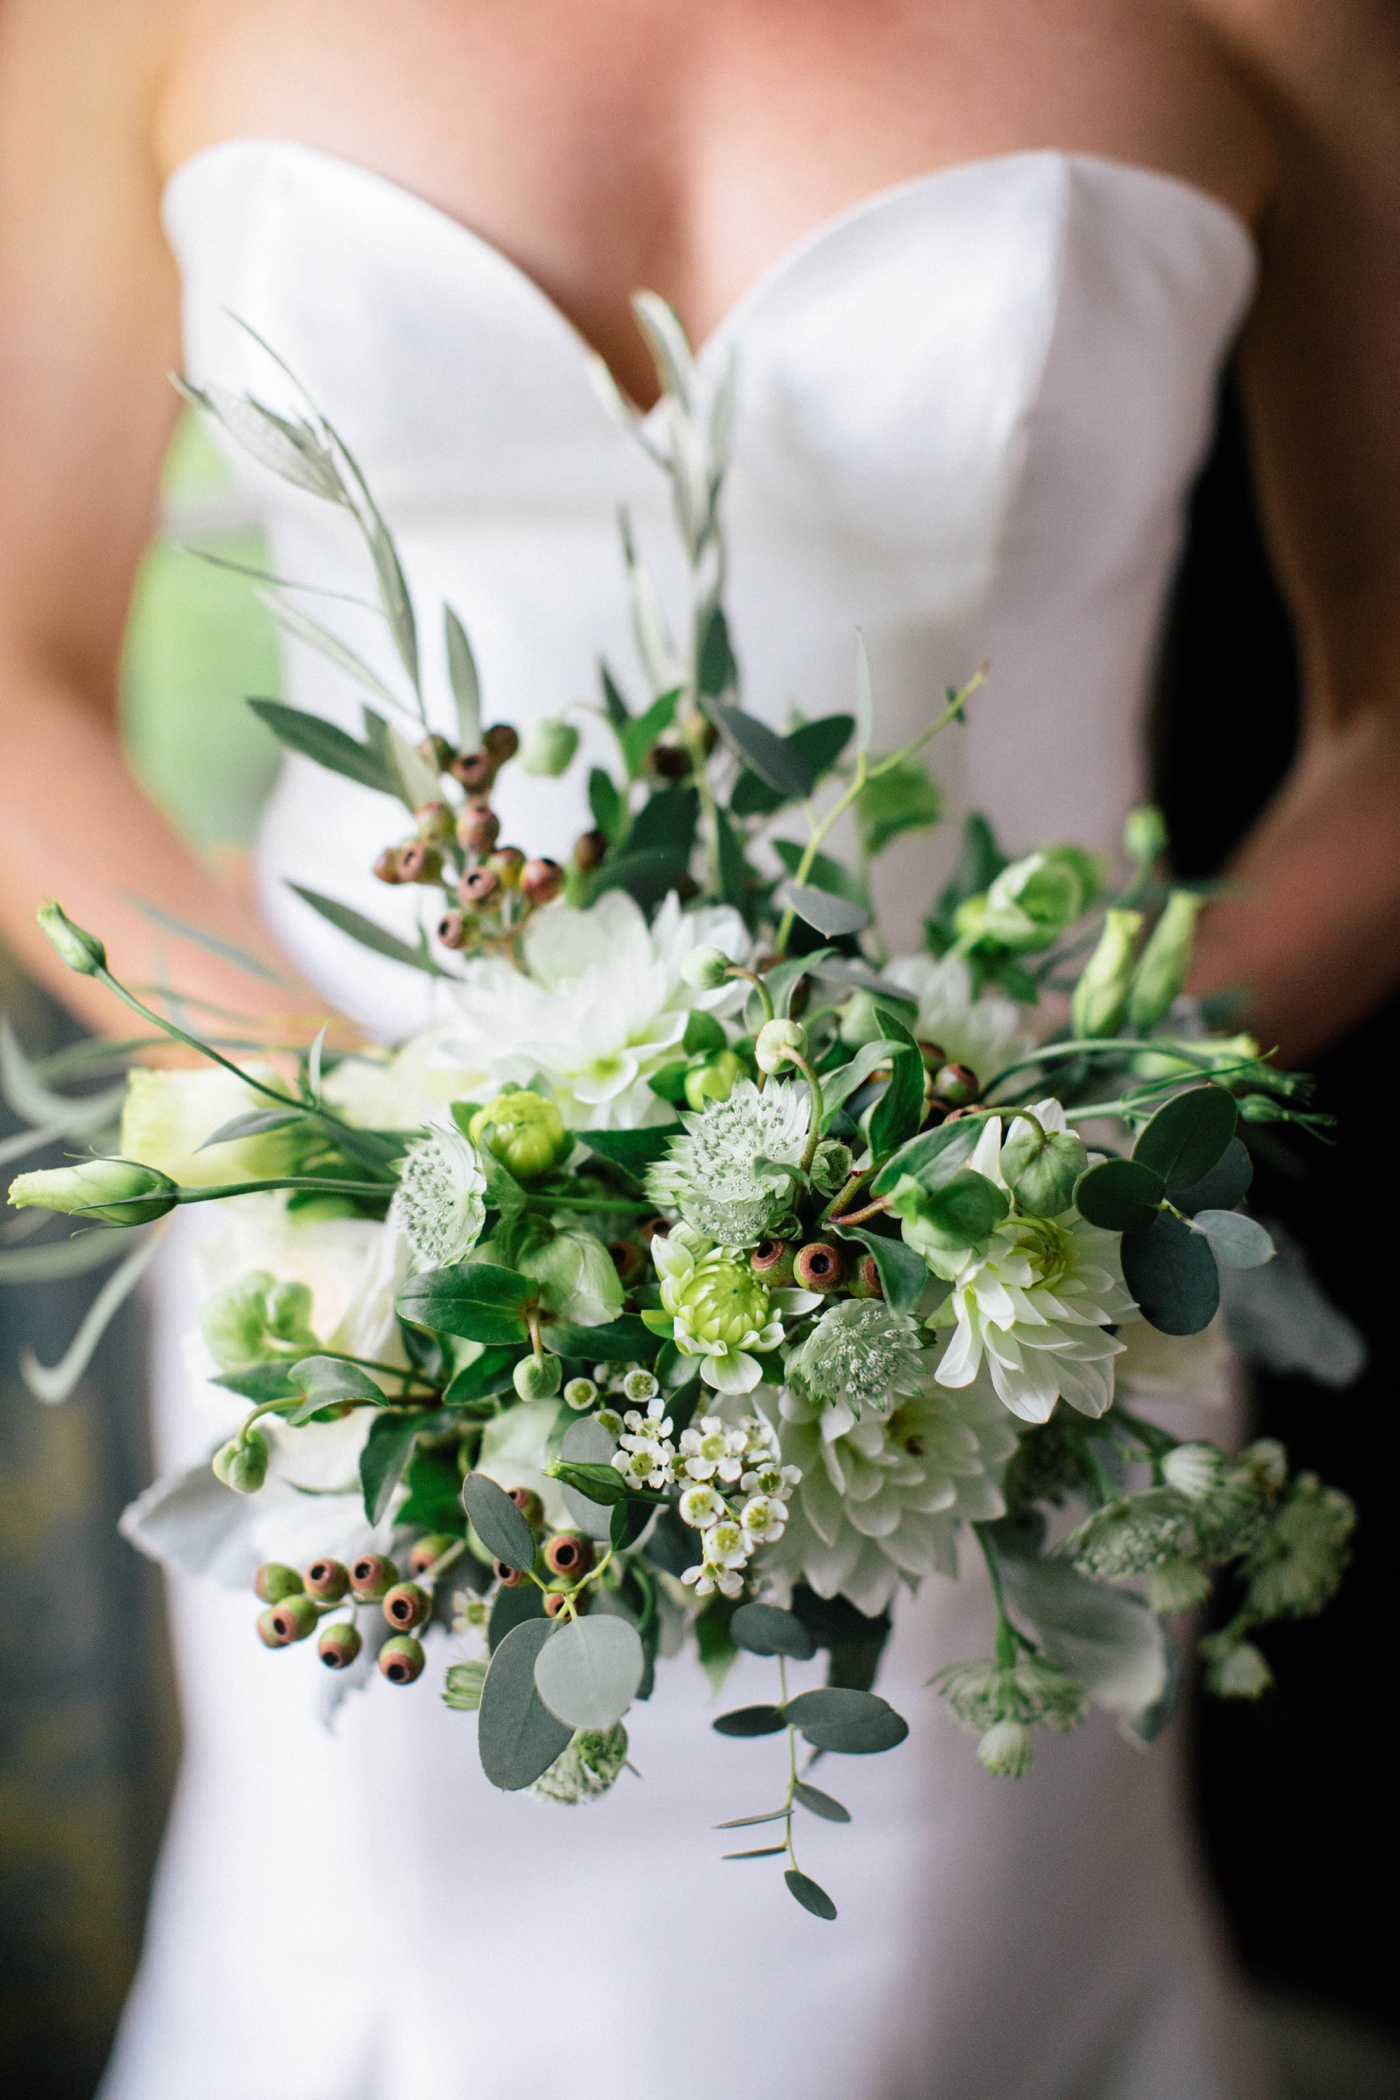 Green and white wedding bouquet filled with dahlias and astrantia by Posies by Trim